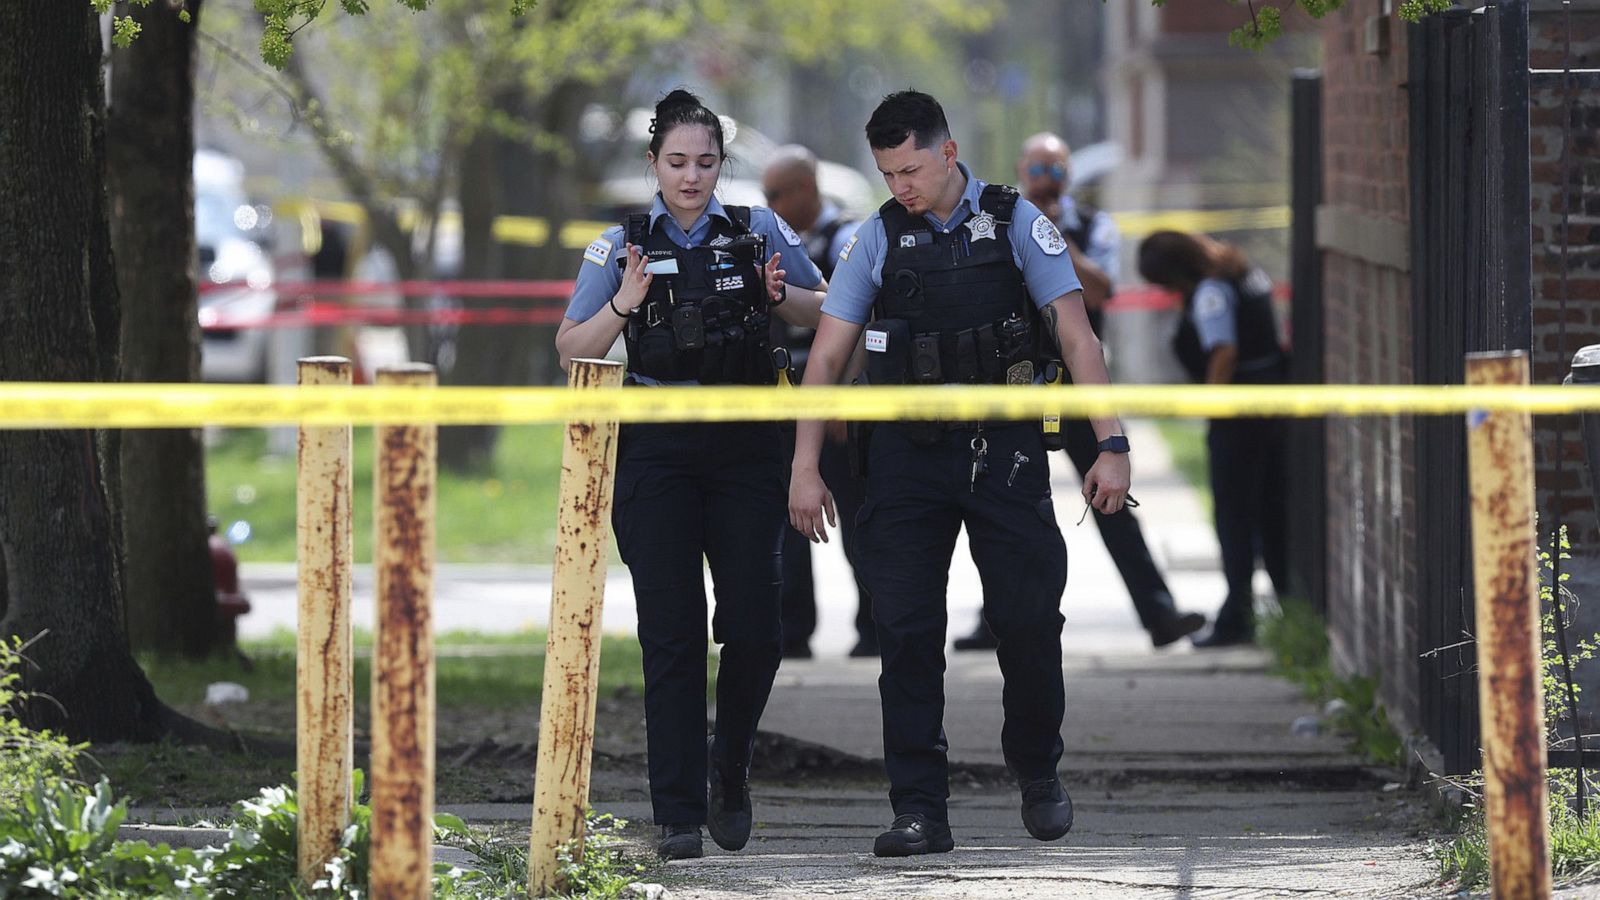 U.S. Gun Violence: Half of People from Chicago Witness a Shooting by Age 40, Study Suggests